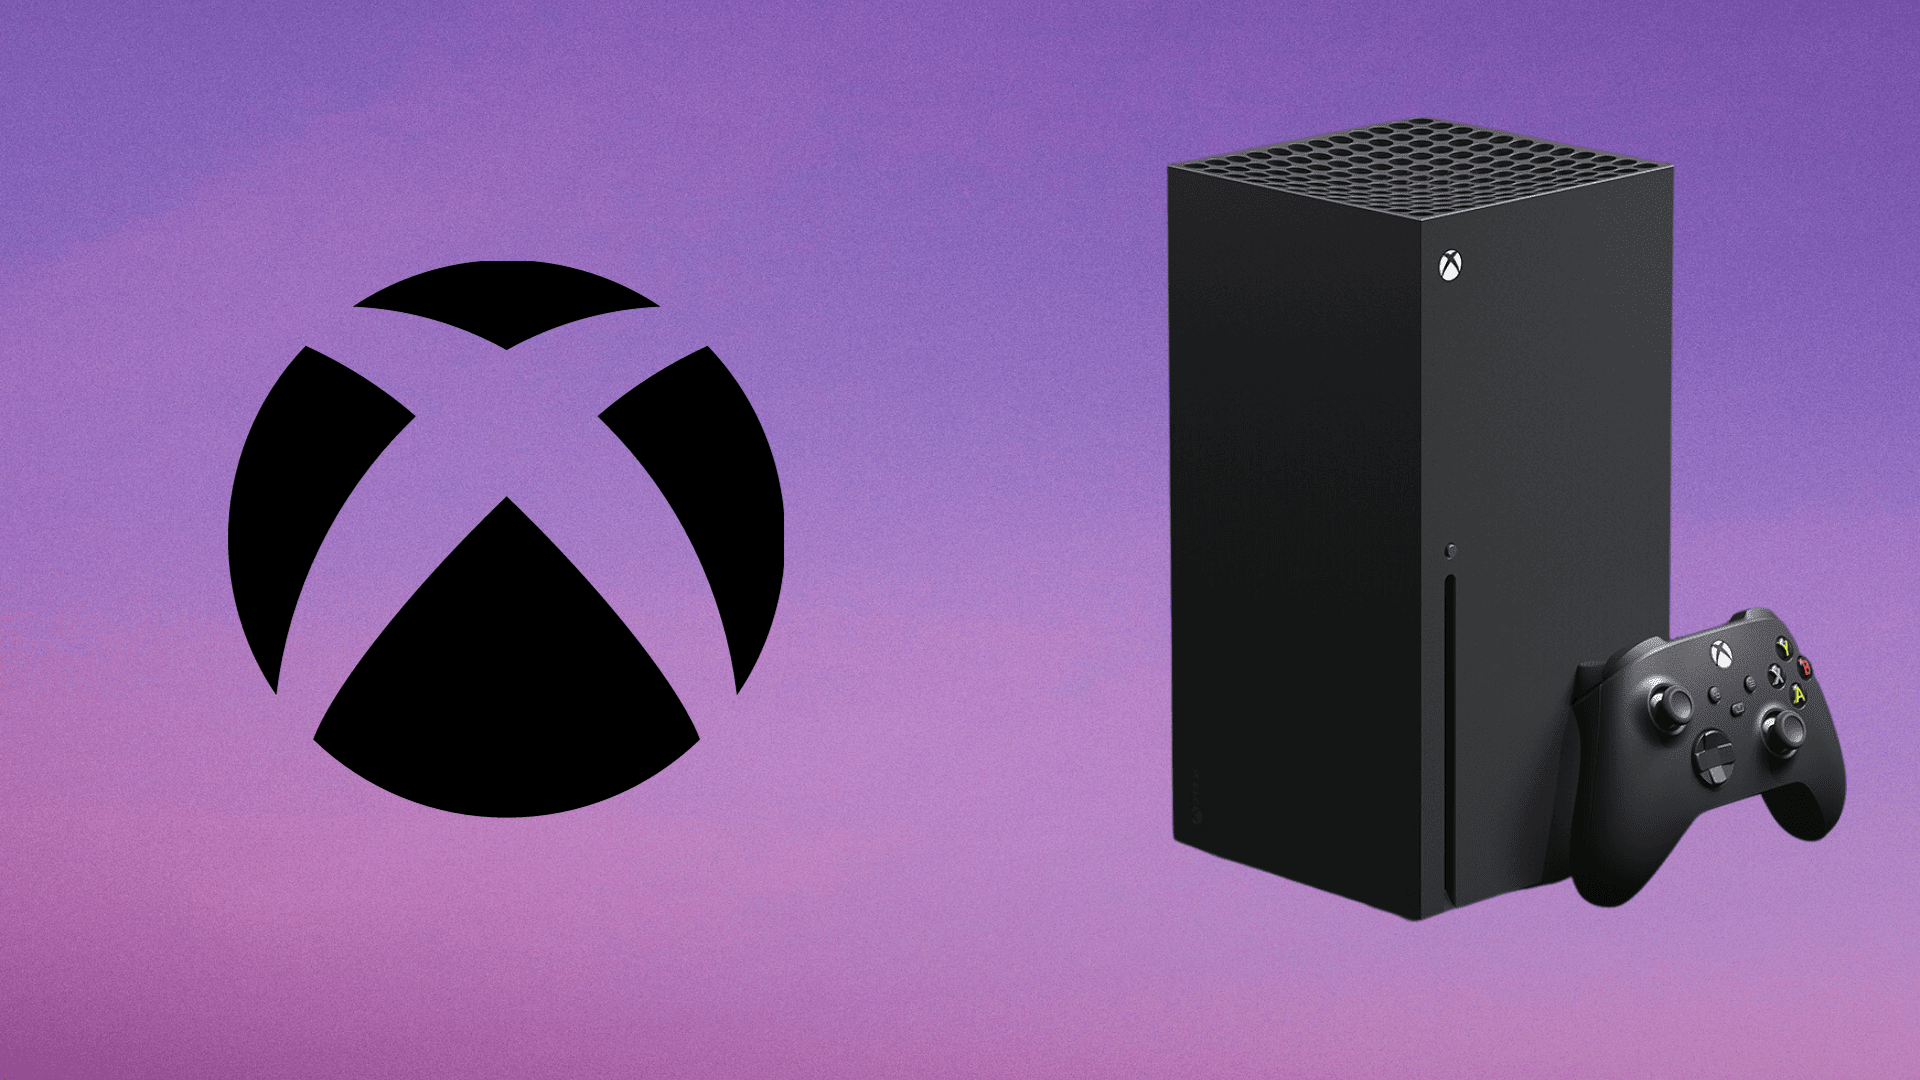 Black Friday 2023: Xbox offers a steal this Black Friday and Cyber Week -  Gayming Magazine